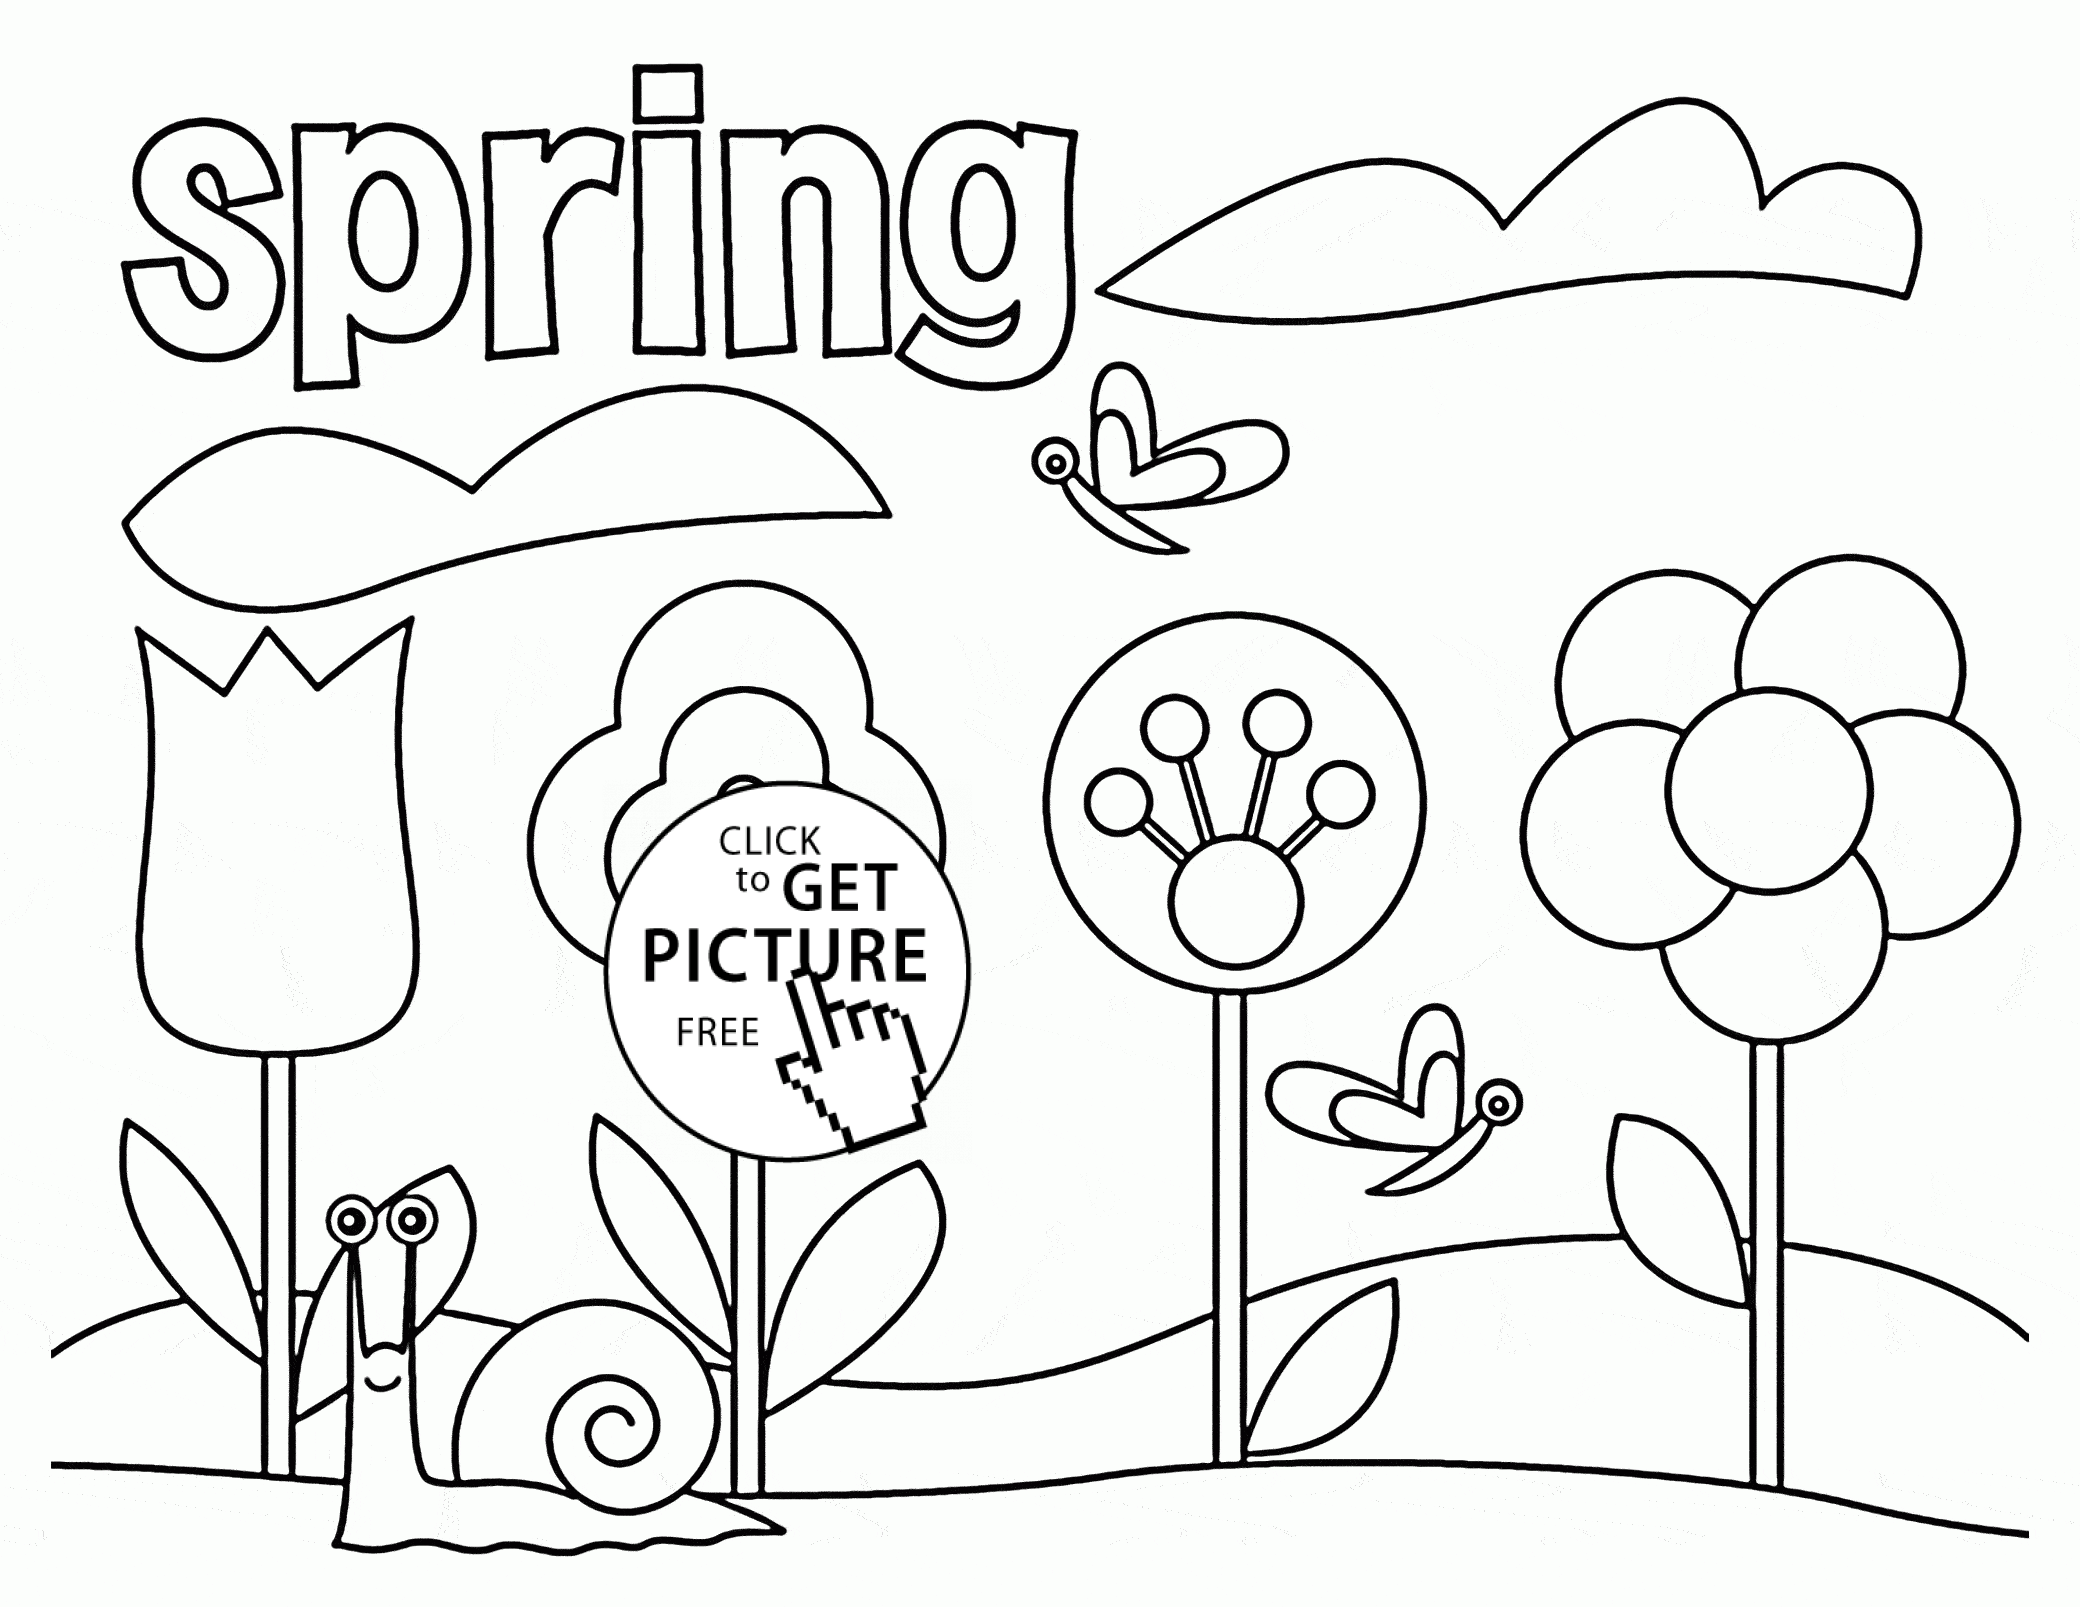 Spring coloring page.